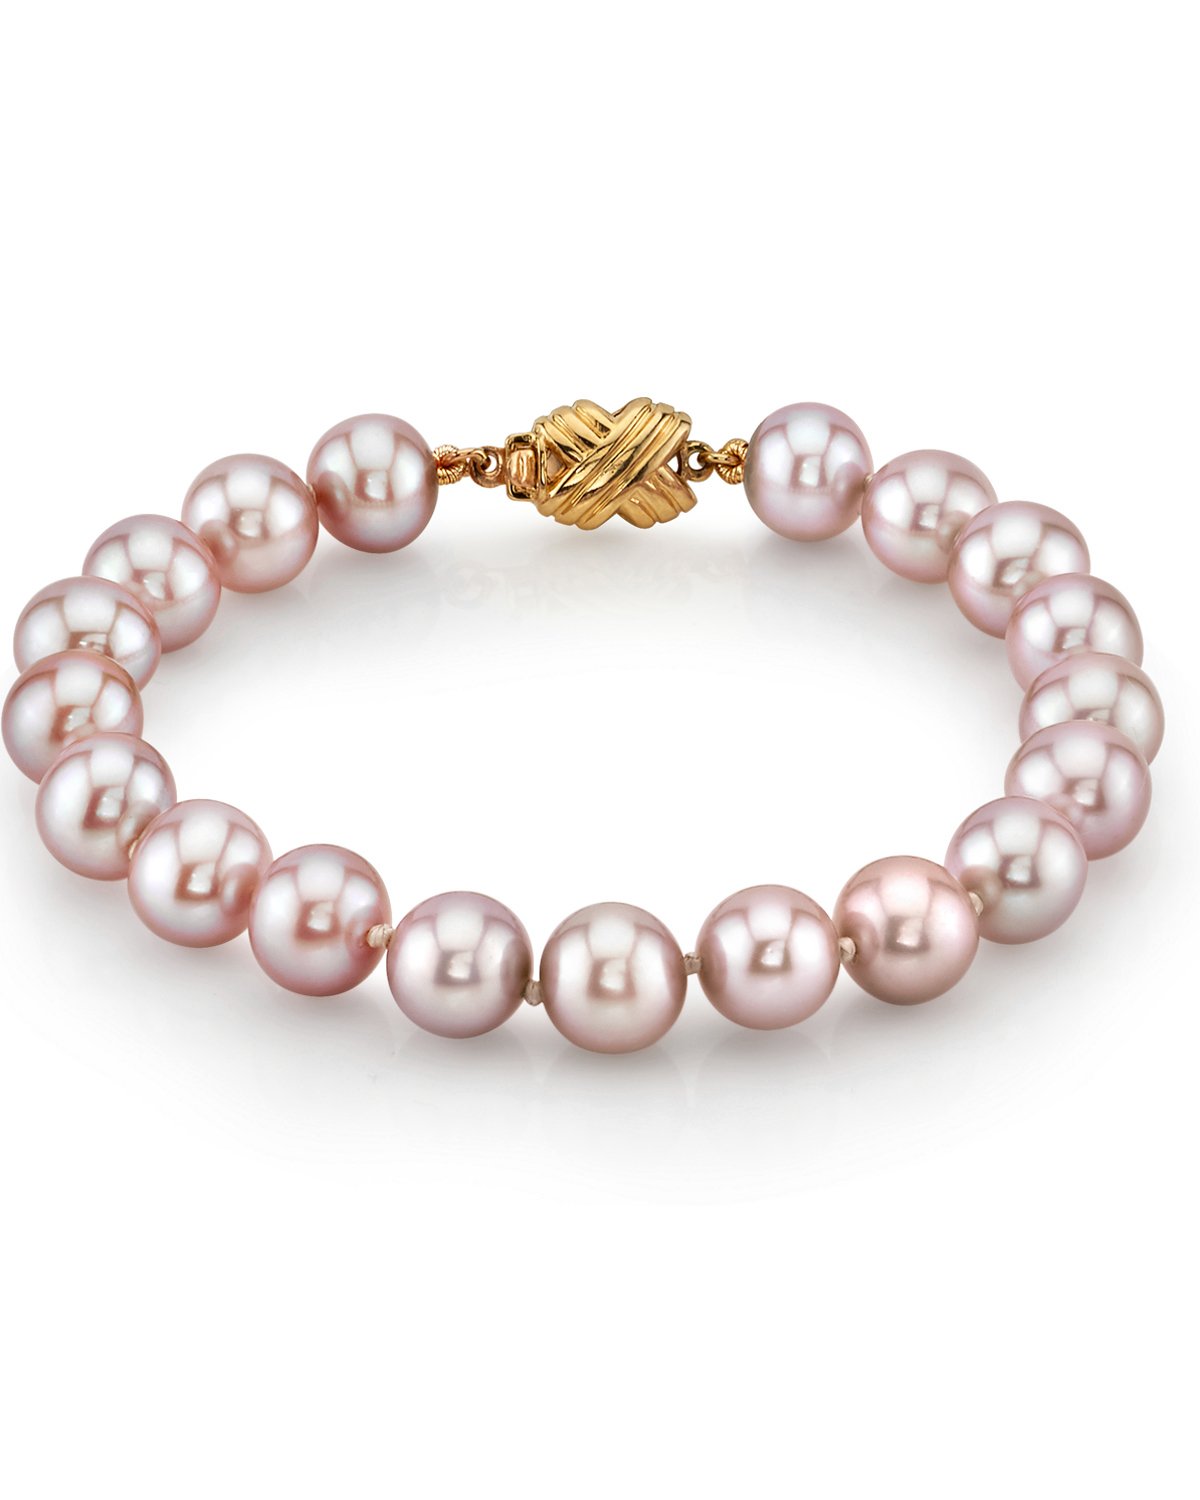 7.0-7.5mm Pink Freshwater Pearl Bracelet - AAAA Quality - Third Image